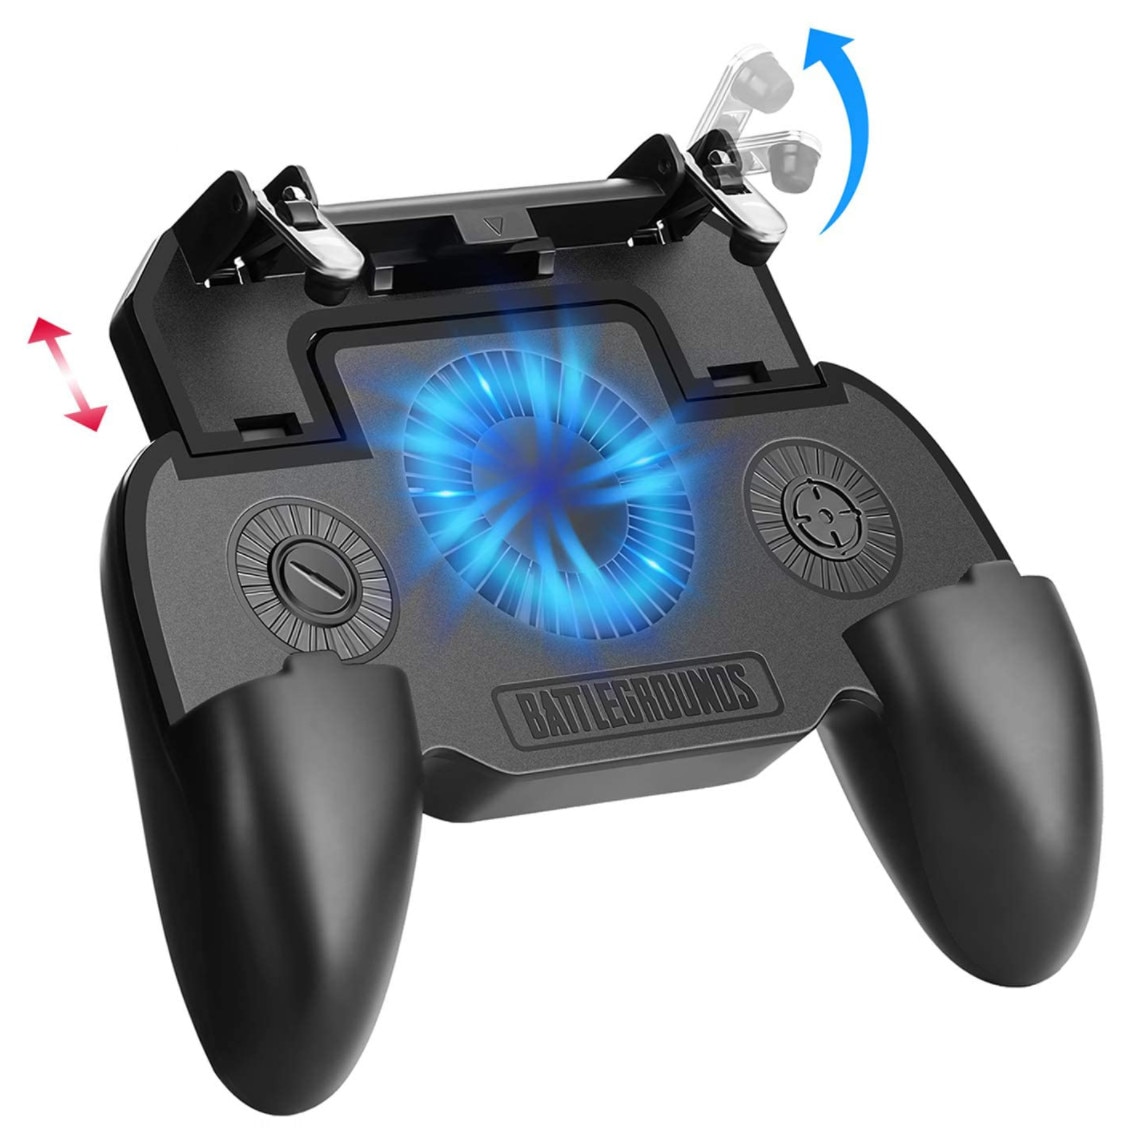 Mansion merge ankle Gamepad Pro Gaming Mobile SR-4000, Smartphone, Android, Ios, Universal  Compatibil, Cooling Fan, Acumulator 4000mah, Triggere Metalice, Mod 4  Degete, PUBG, COD, Apex Legends - eMAG.ro